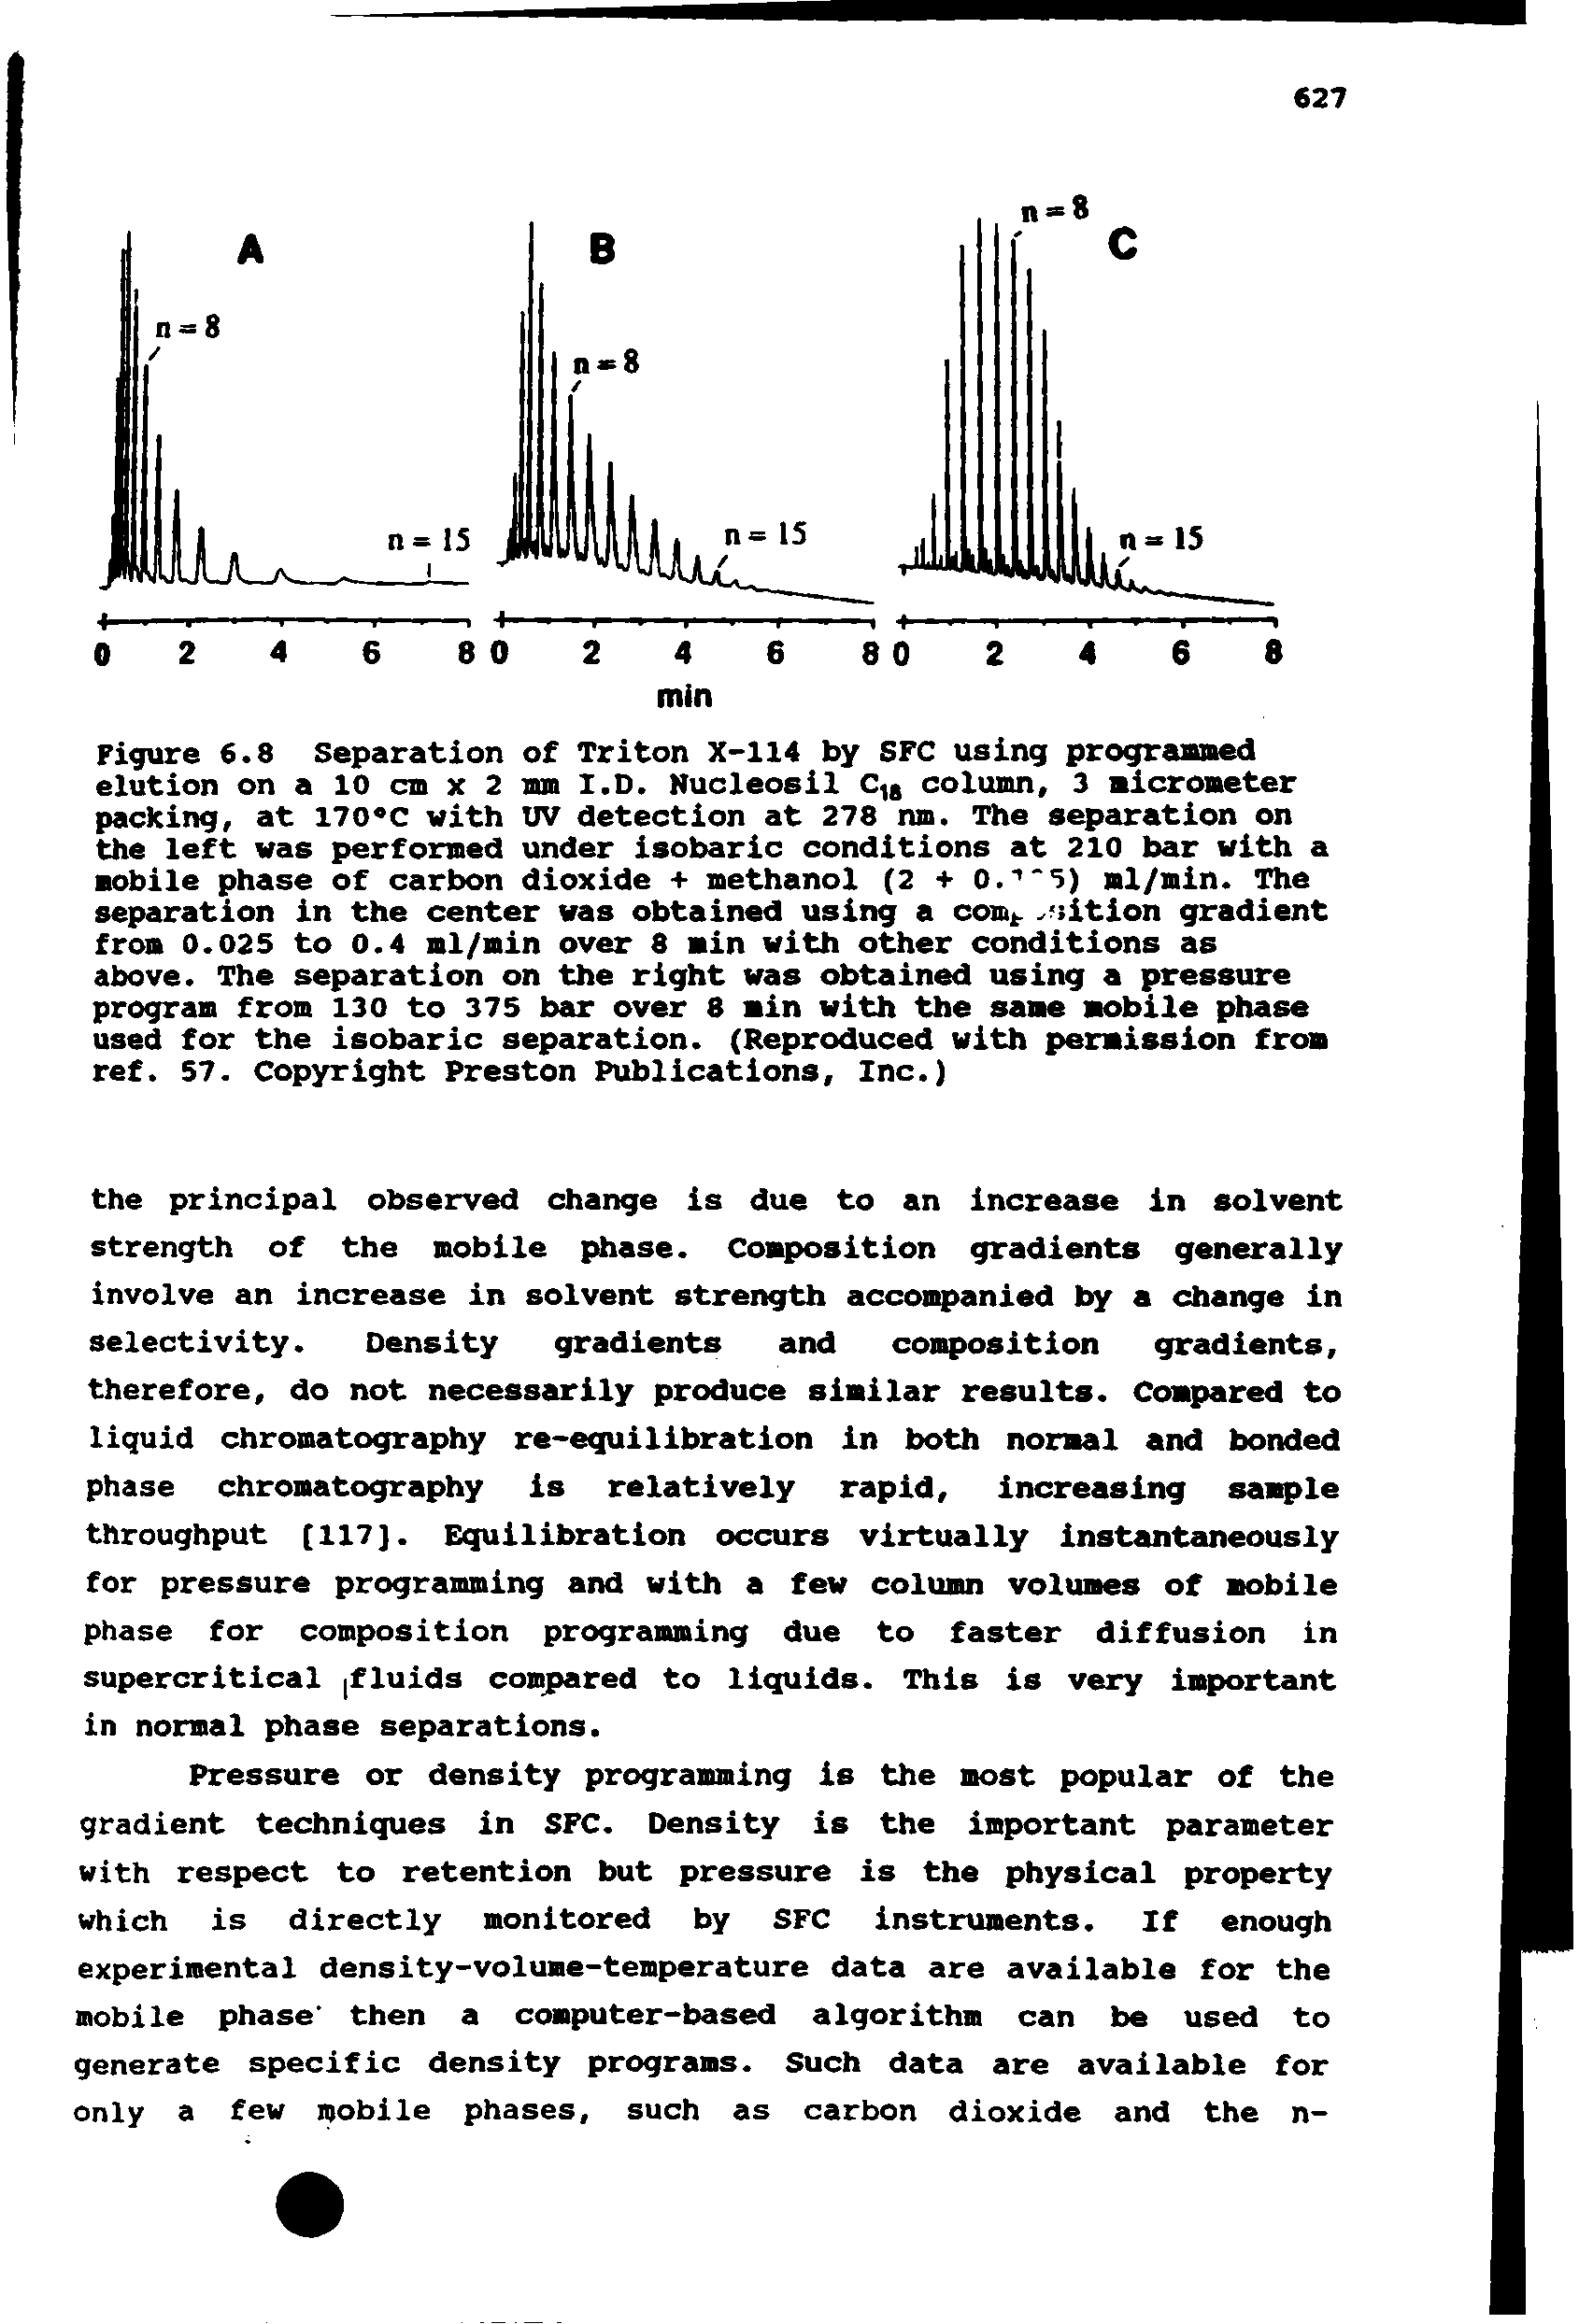 Figure 6.8 Separation of Triton X-114 by SFC using prograMmed elution on a 10 cm x 2 mm I.D. Nucleosil column, 3 micrometer packing, at 170 C with UV detection at 278 nm. The separation on the left was performed under isobaric conditions at 210 bar with a mobile phase of carbon dioxide -t- methanol (2 + 0. 5) ml/min. The separation in the center was obtained using a ccmt. sition gradient from 0.025 to 0.4 ml/mln over 8 min with other conditions as above. The separation on the right was obtained using a pressure program from 130 to 375 bar over 8 min with the same mobile phase used for the isobaric sepeuration. (Reproduced with permission from ref. 57. Copyright Preston Publications, Inc.)...